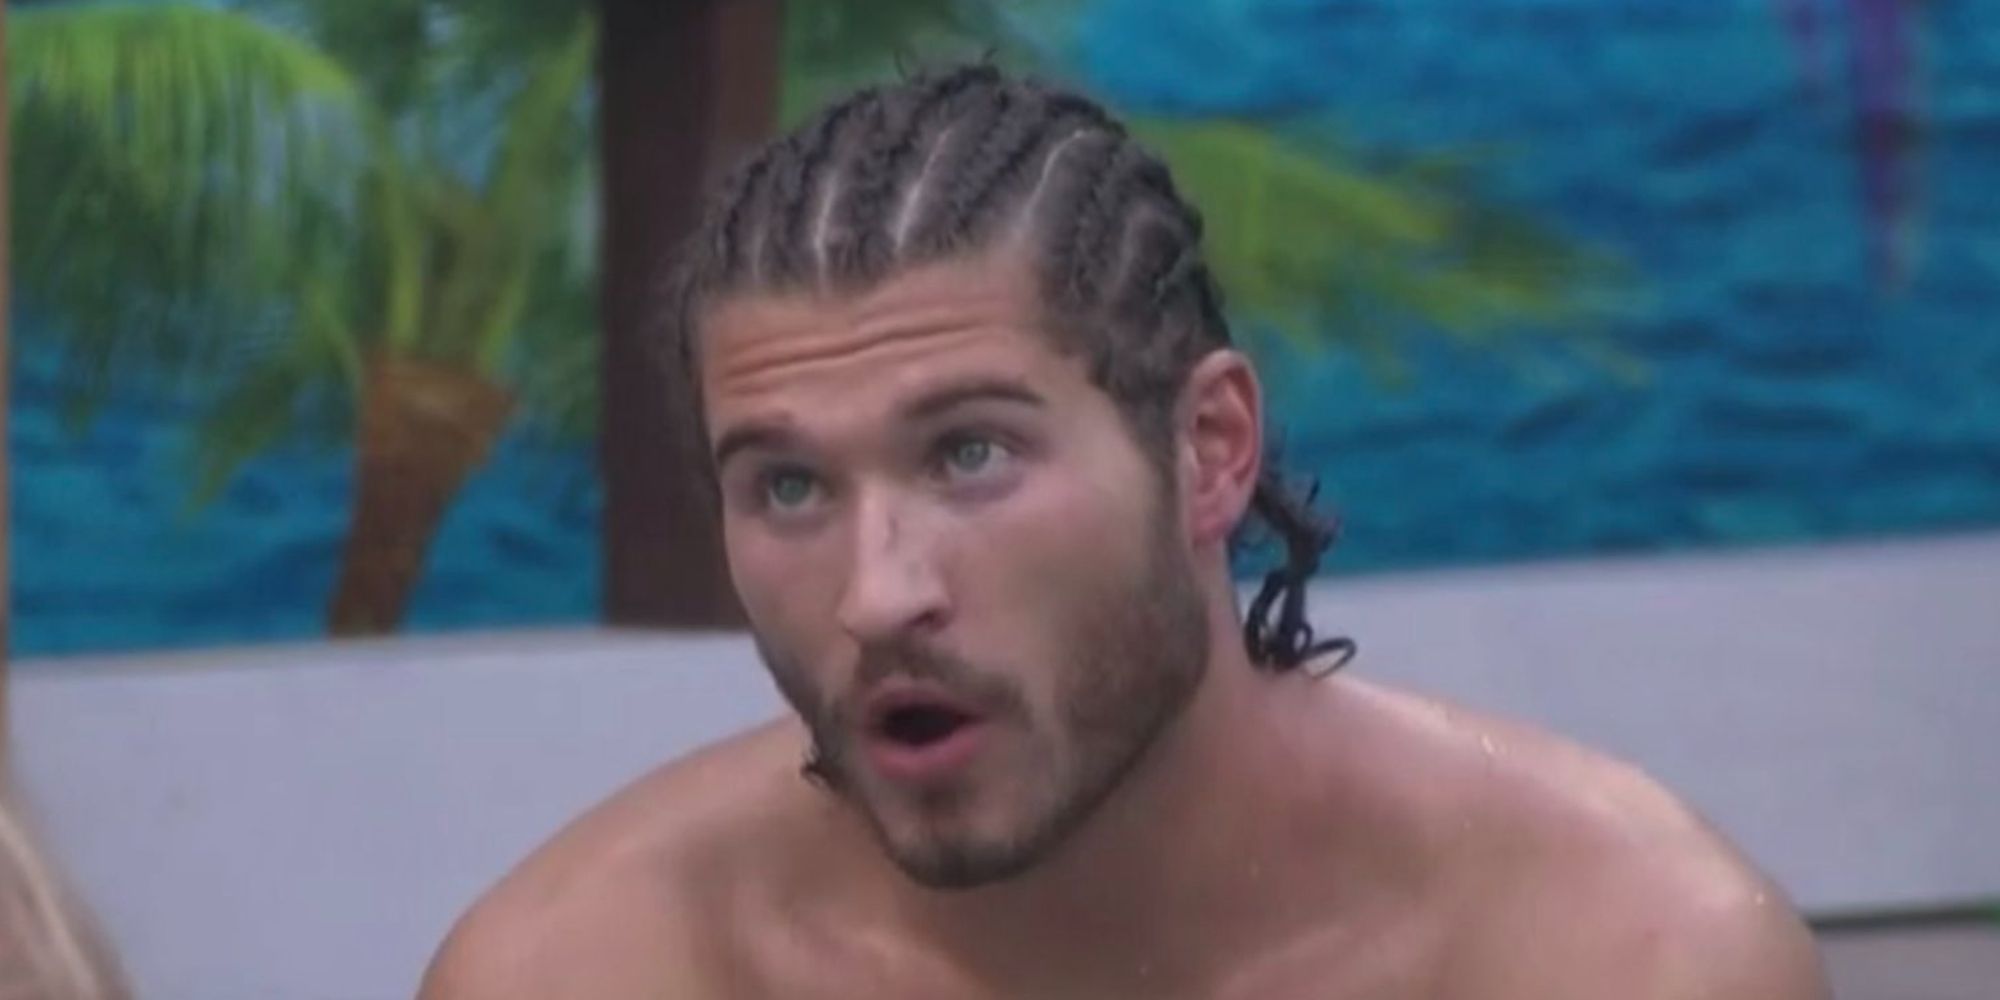 Christian from Big Brother 23 with corn rows, in mid-sentence.